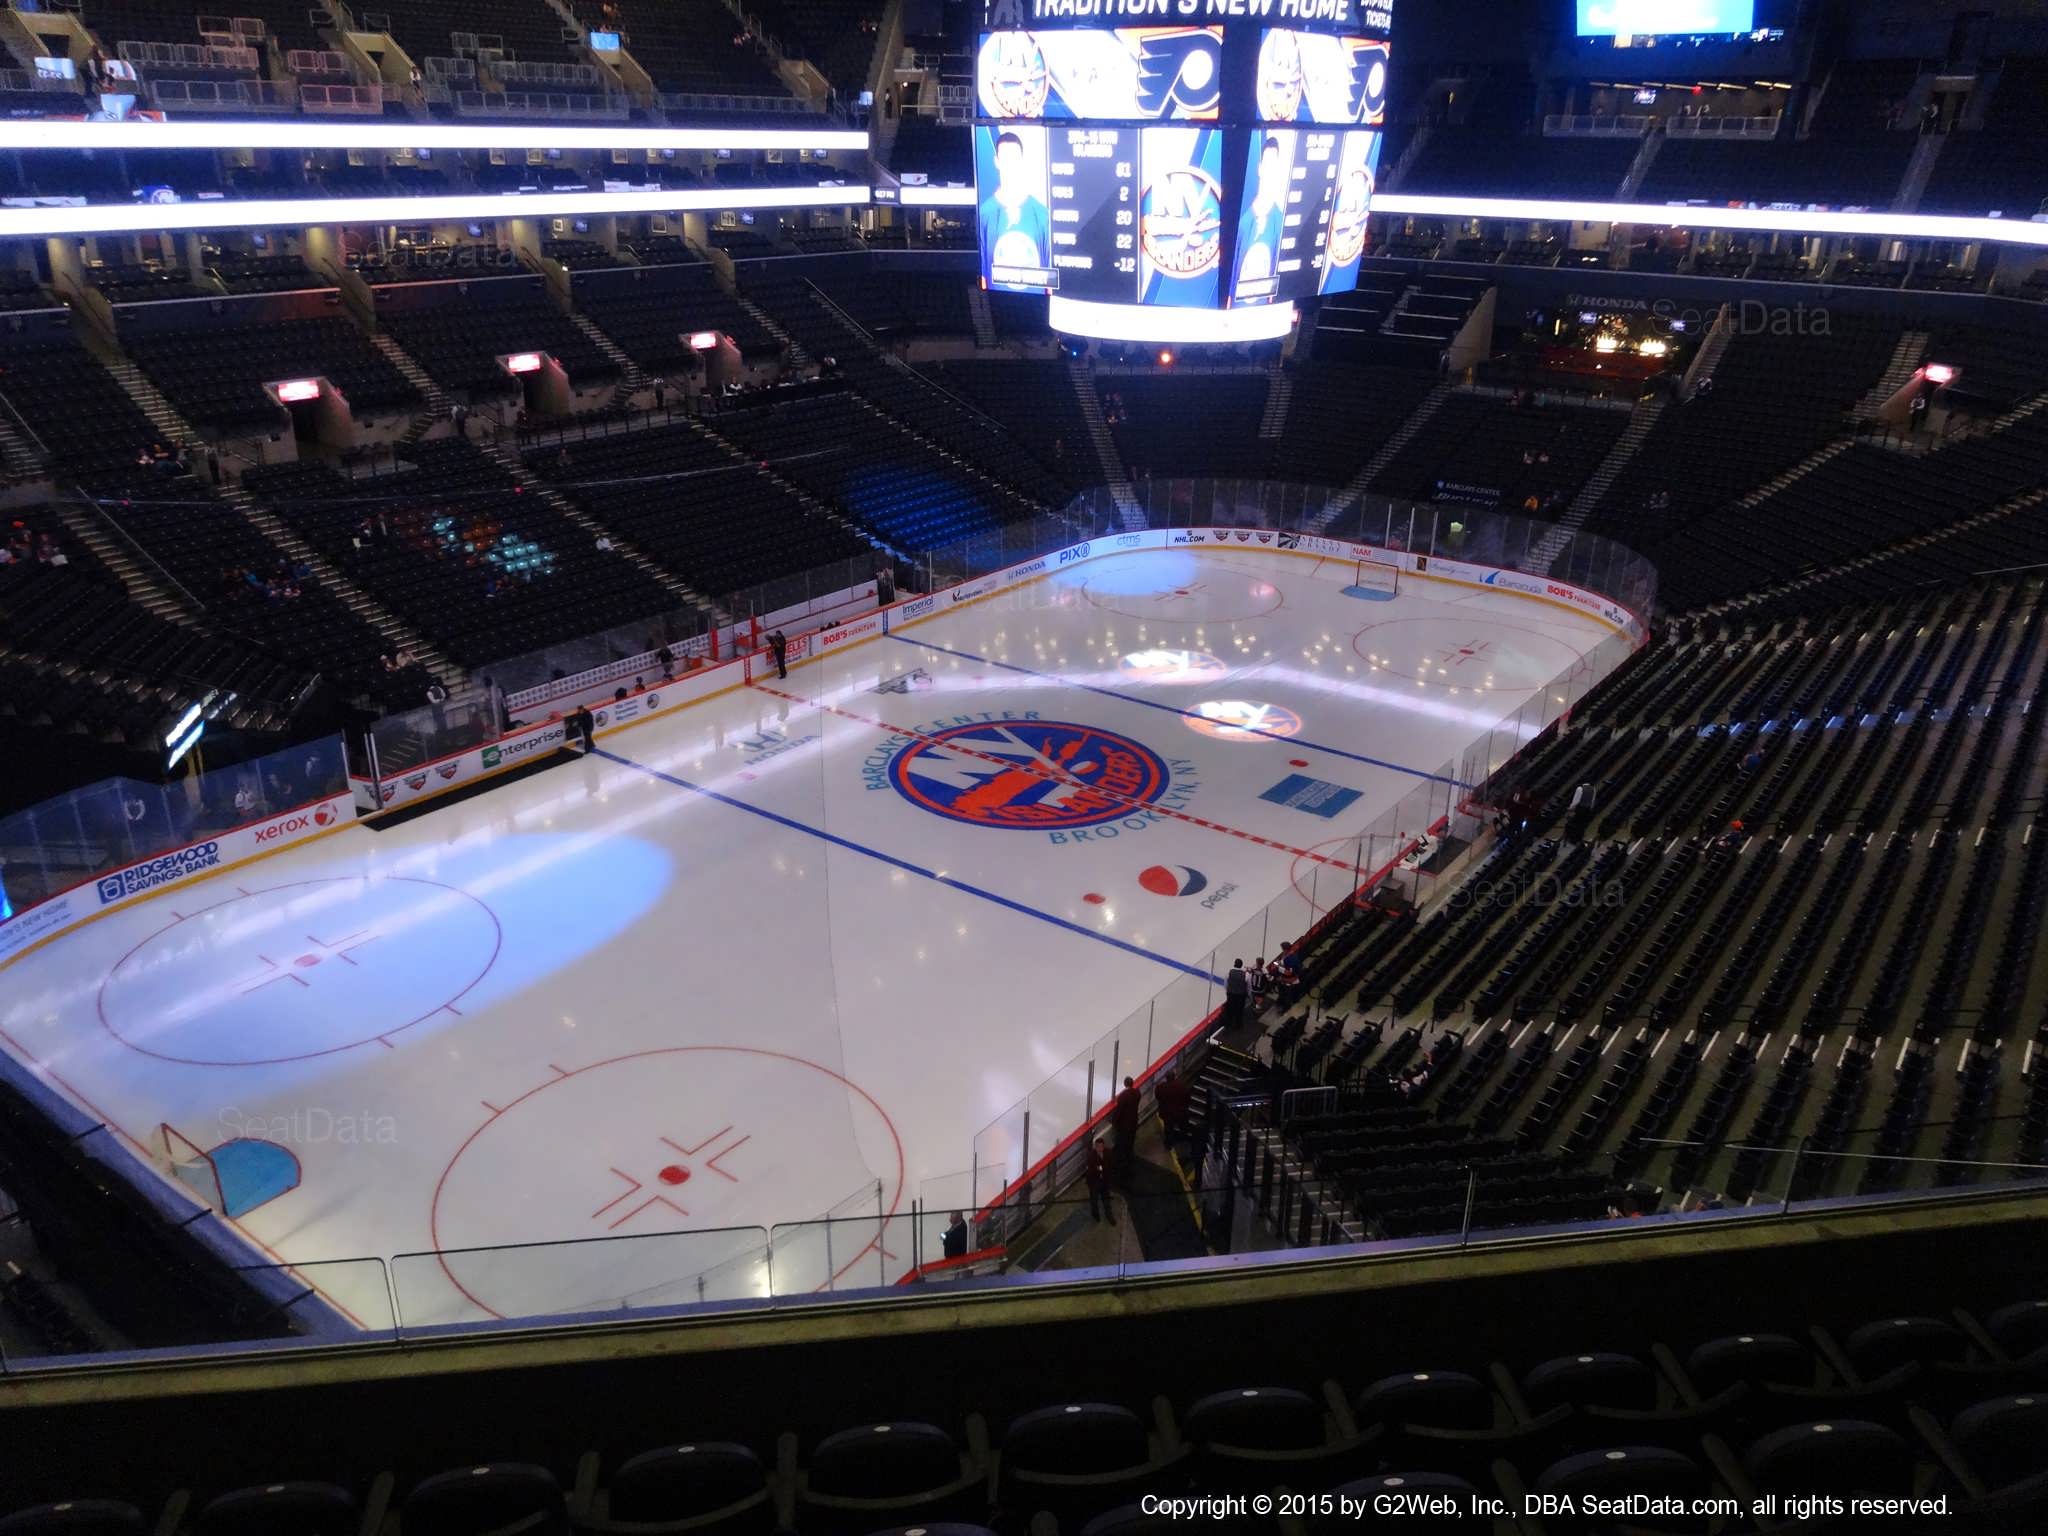 Seat View from Section 228 at the Barclays Center, home of the New York Islanders